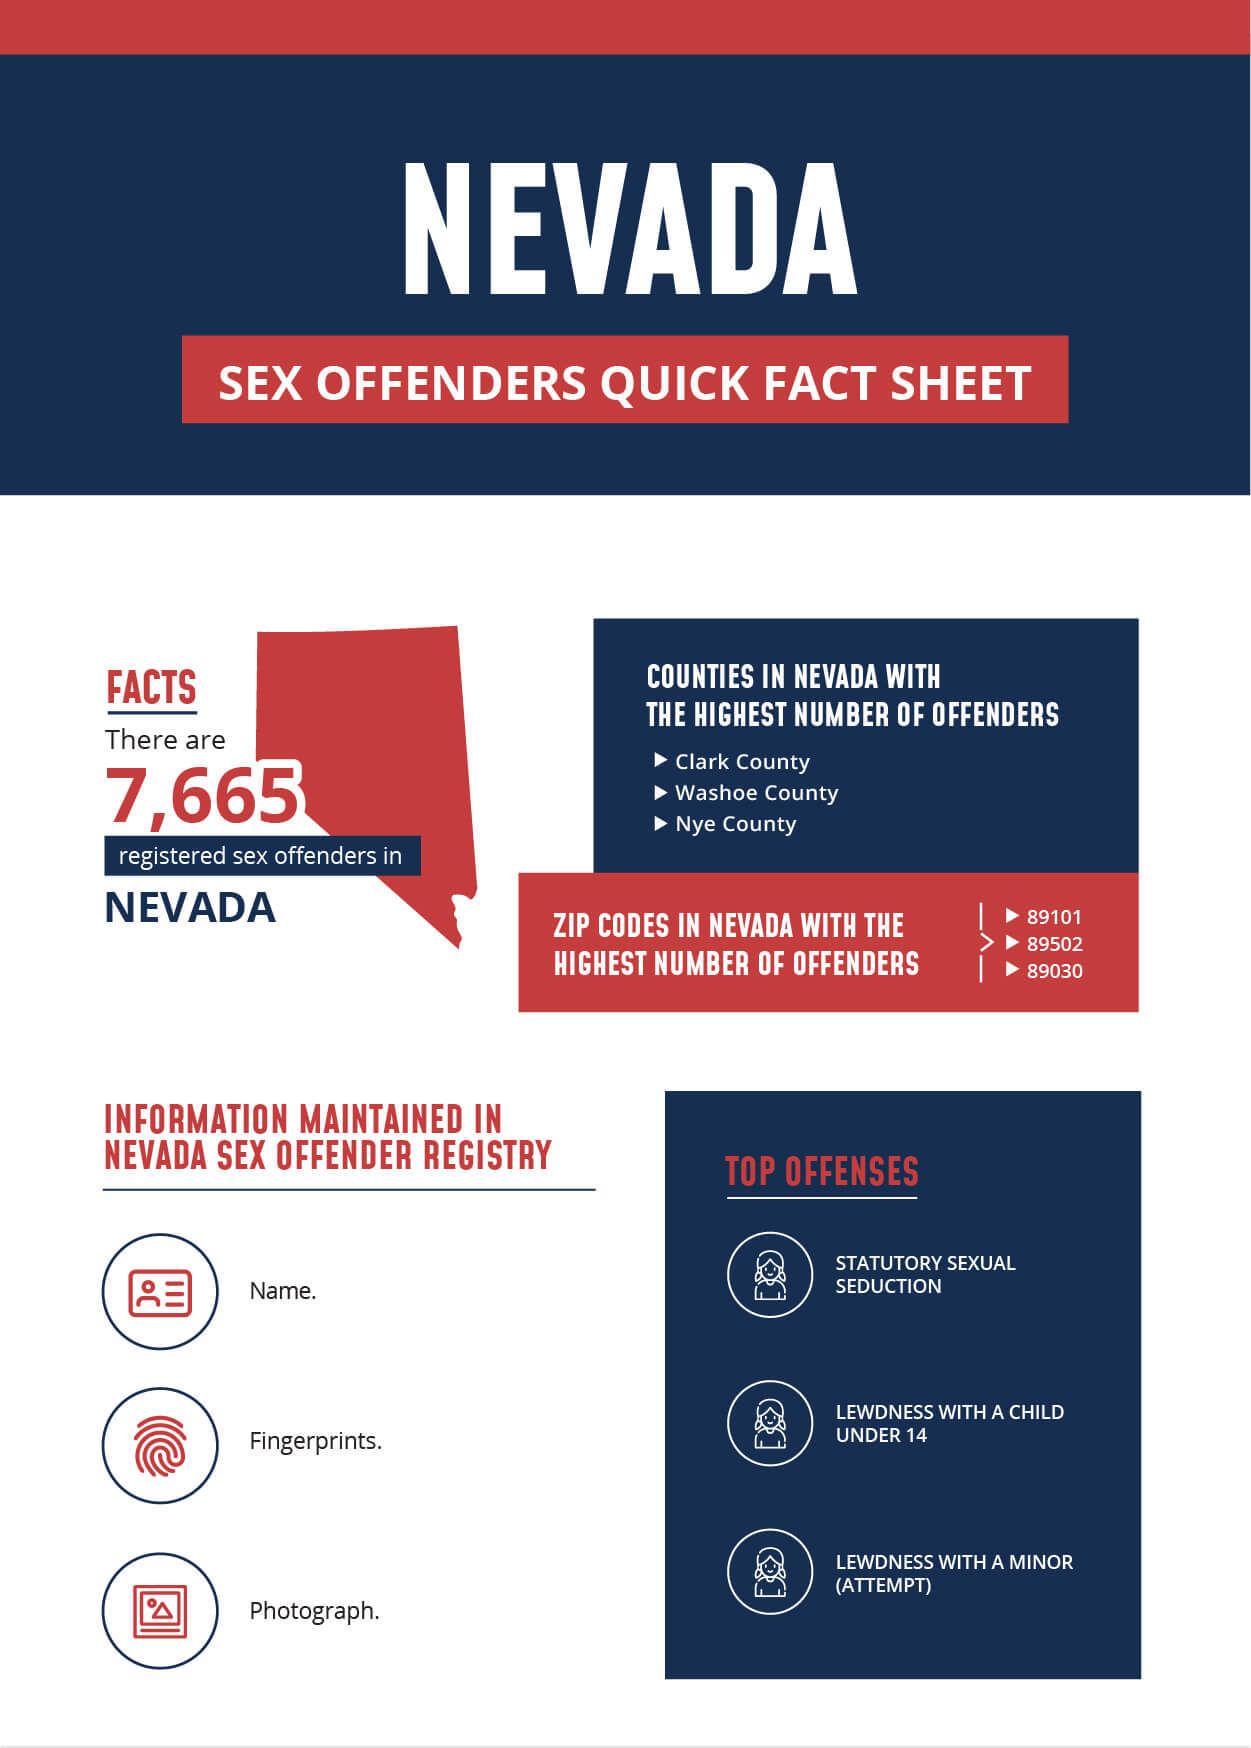 Registered Offenders List Find Sex Offenders In Nevada